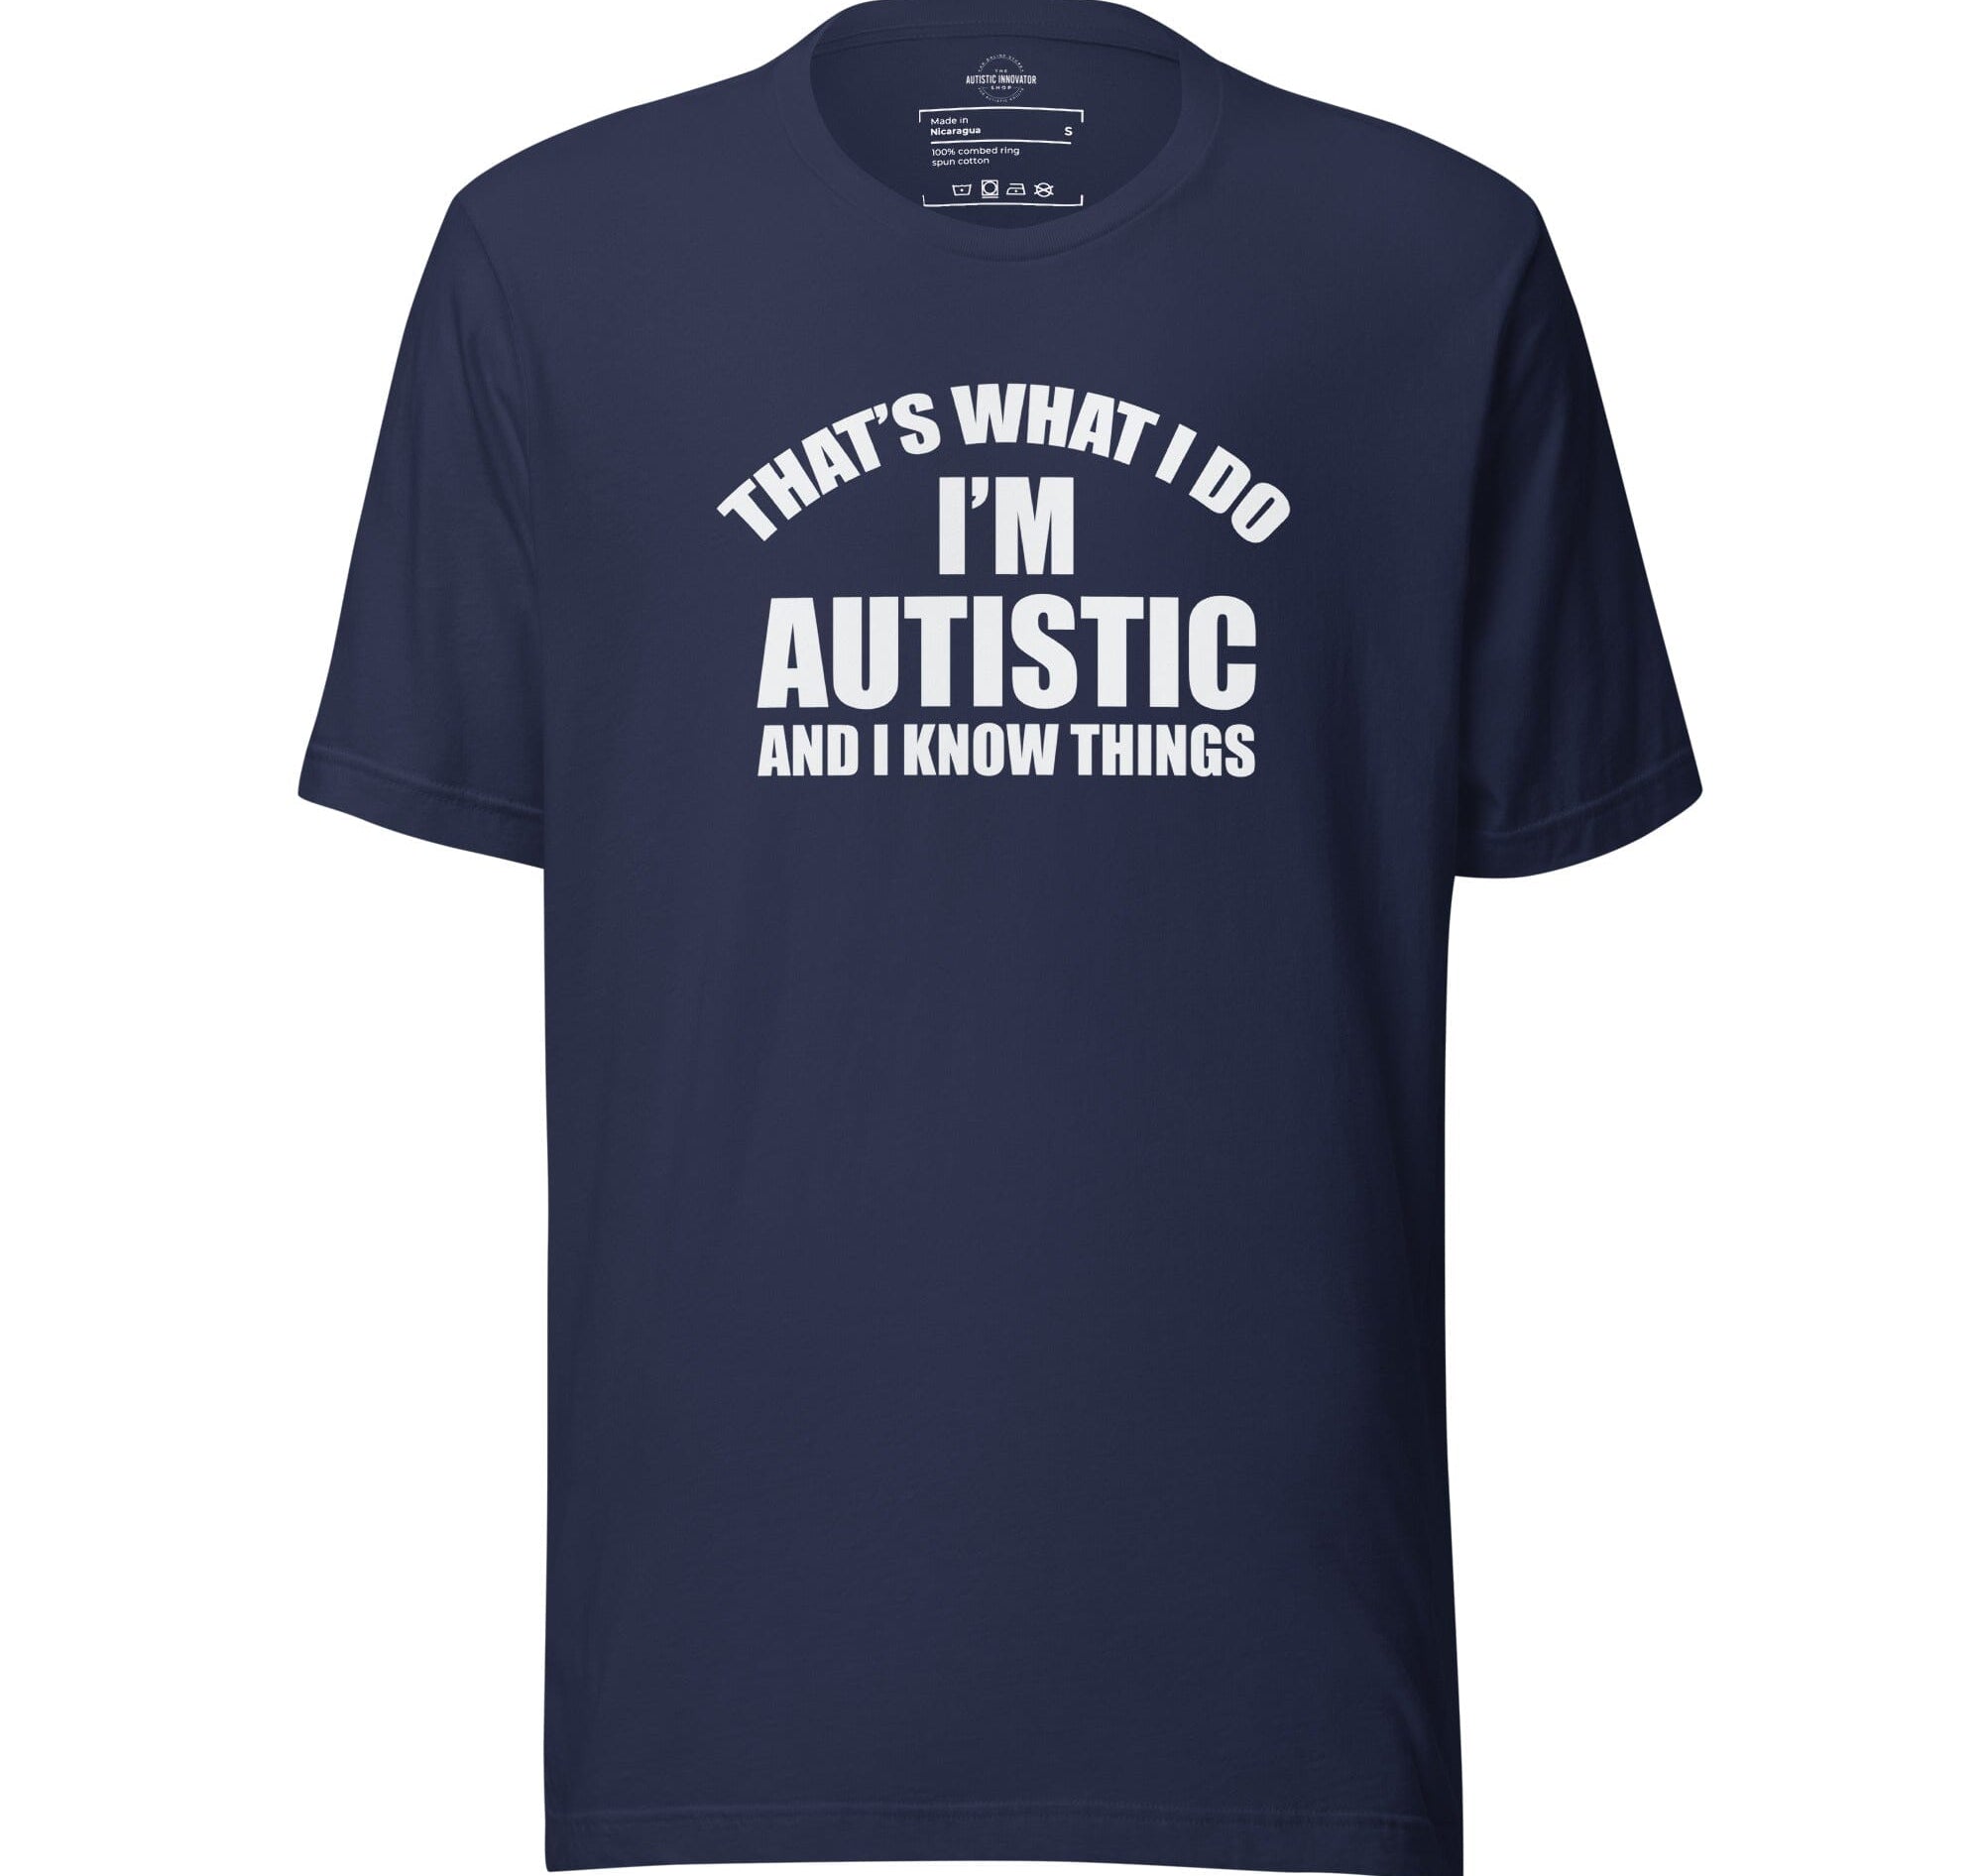 That's What I Do, I'm Autistic and I Know Things Unisex t-shirt The Autistic Innovator Navy S 